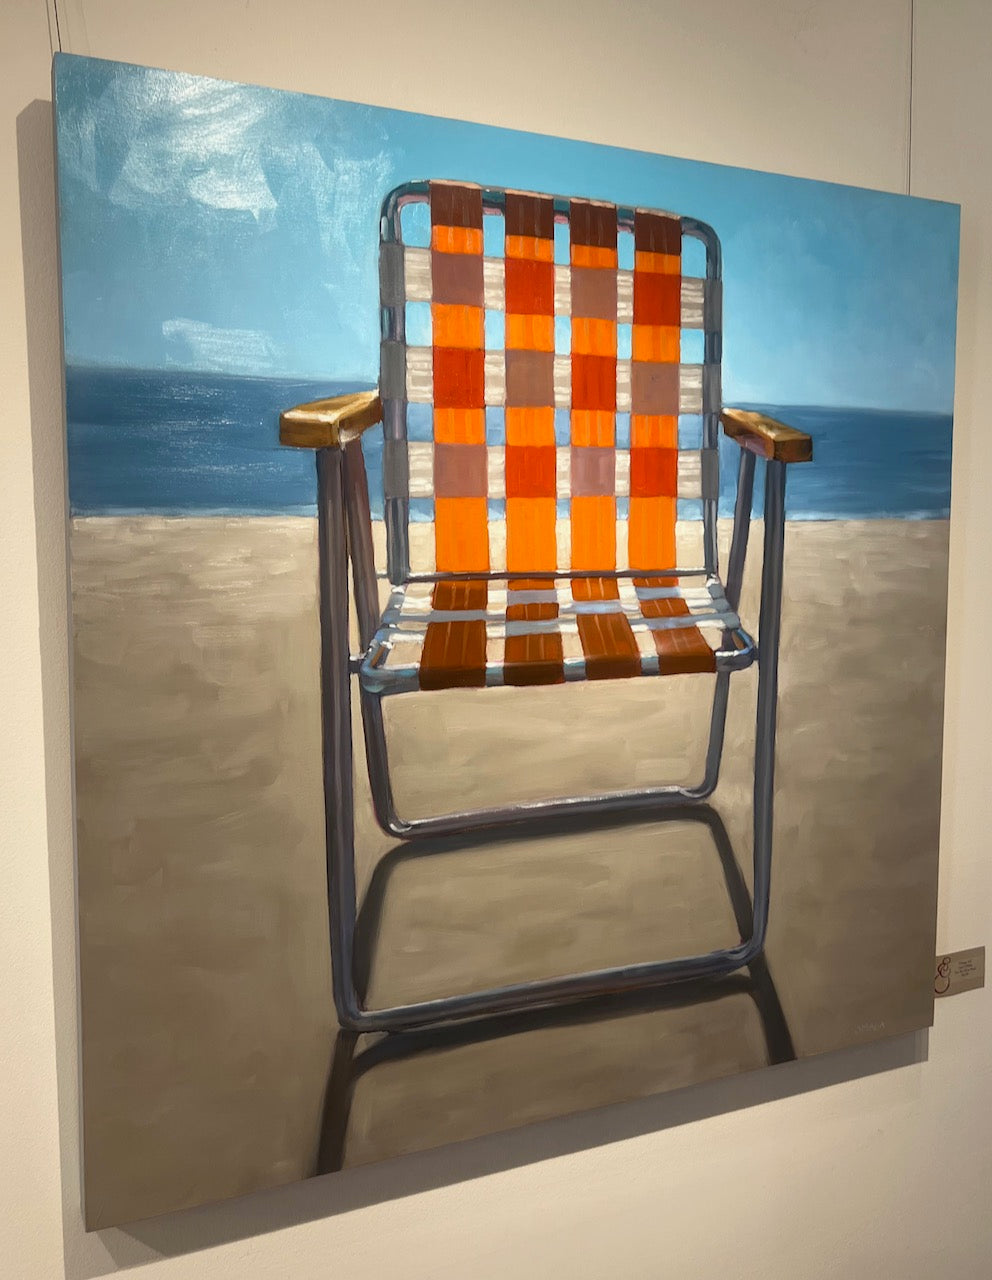 still life oil painting of an orange and white beach chair sitting in the sand in front of the ocean